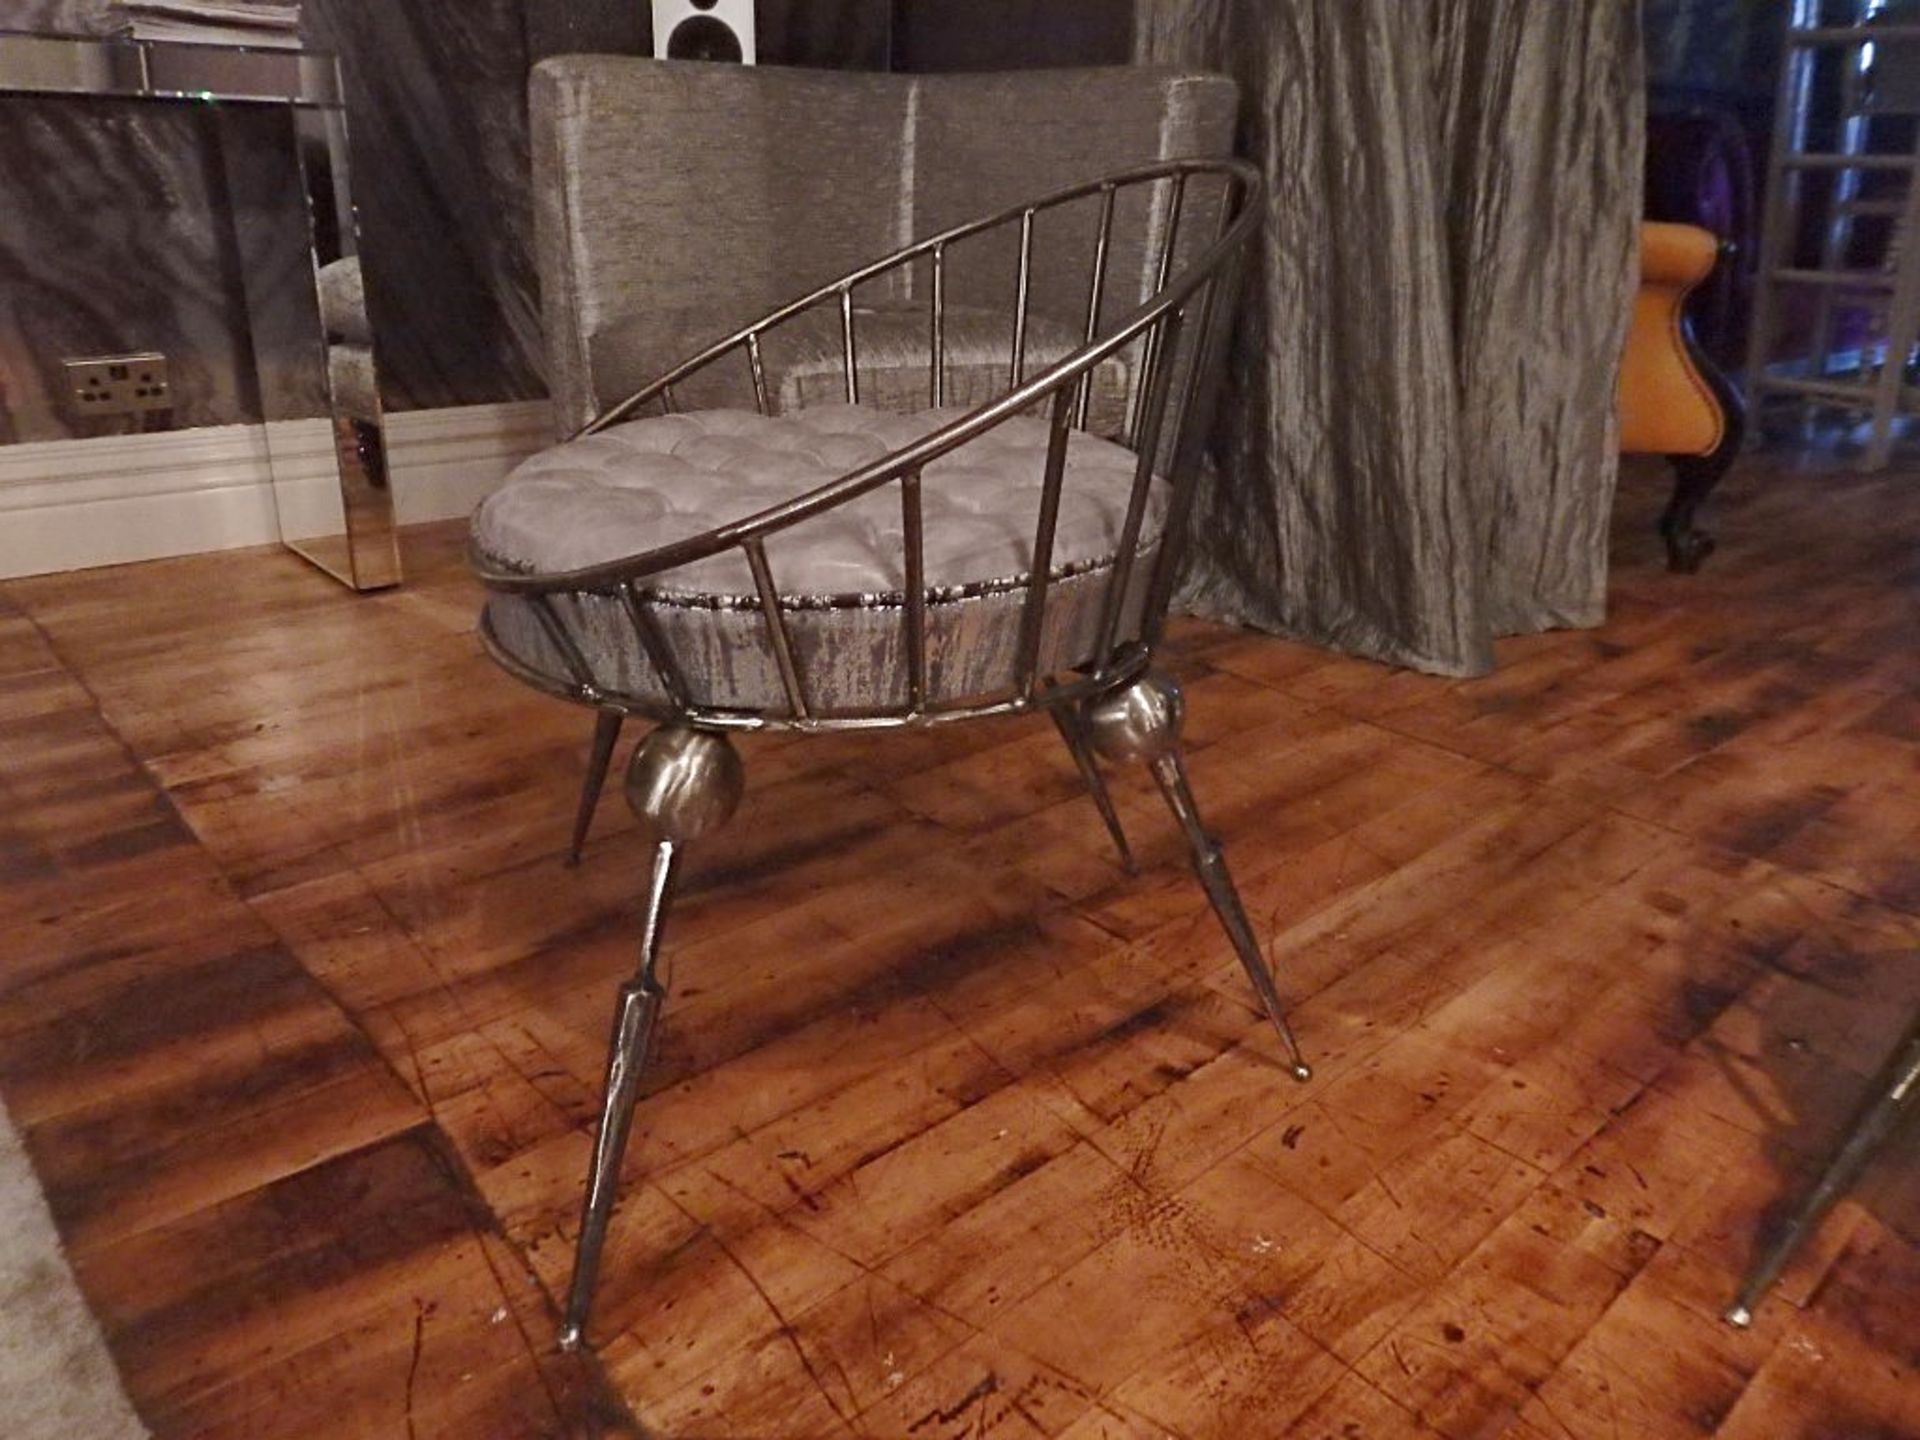 1 x Bespoke Handcrafted Chair - Unique Metal Framework With Leather Upholstered Cushion  - Colour: - Image 4 of 6